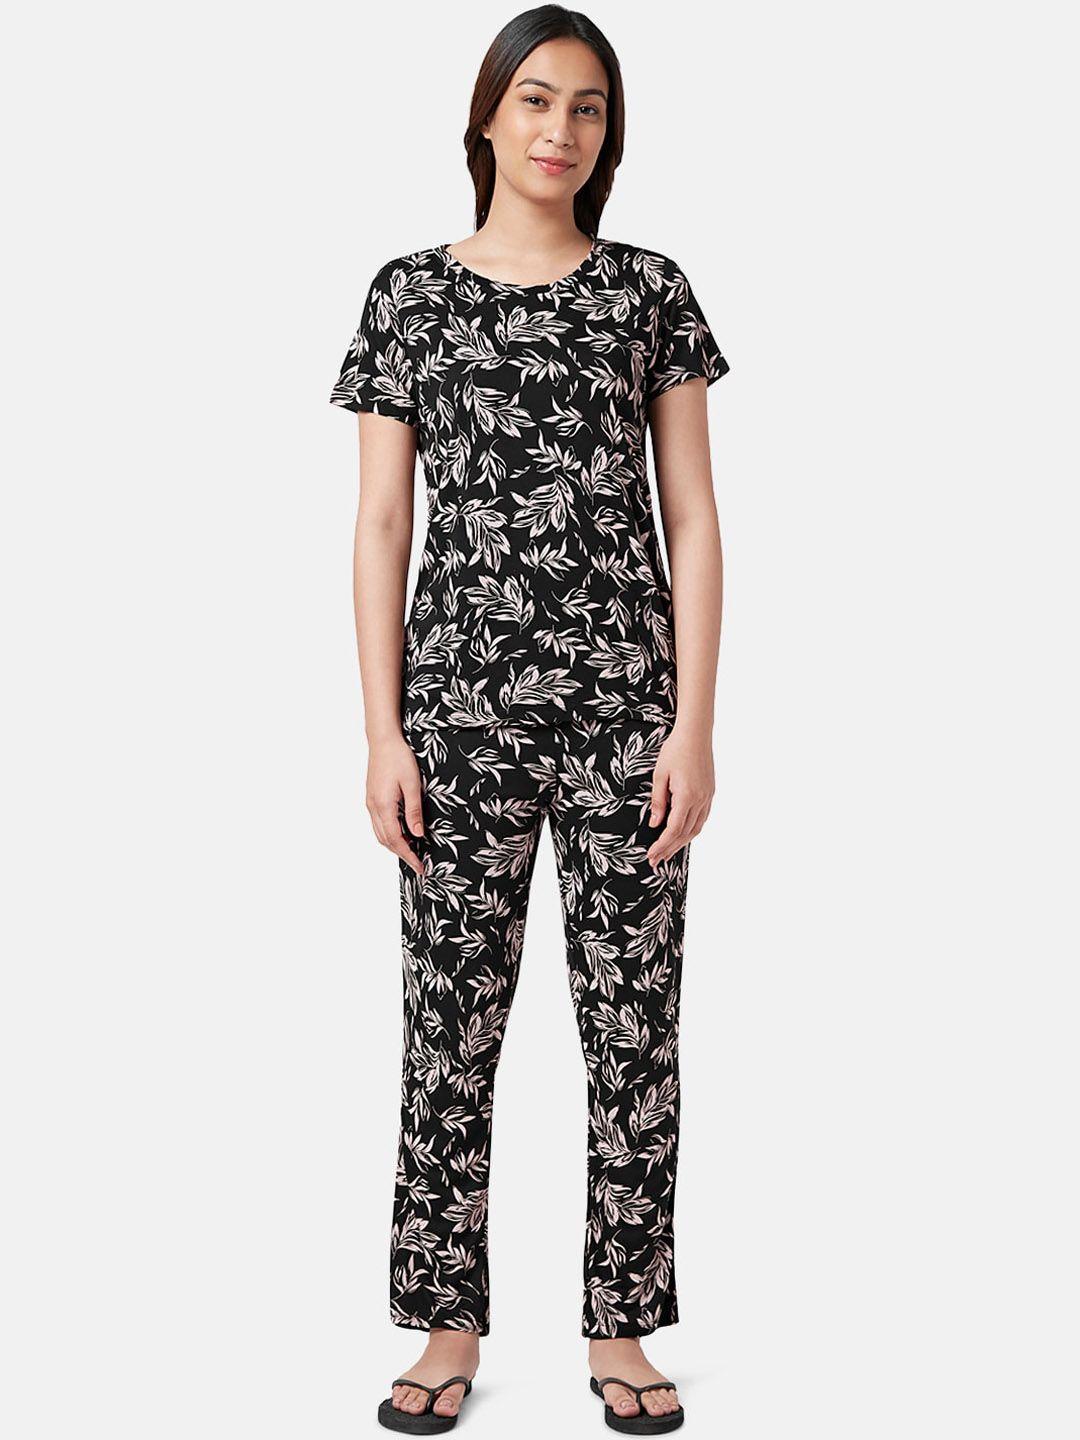 dreamz-by-pantaloons-floral-printed-night-suit